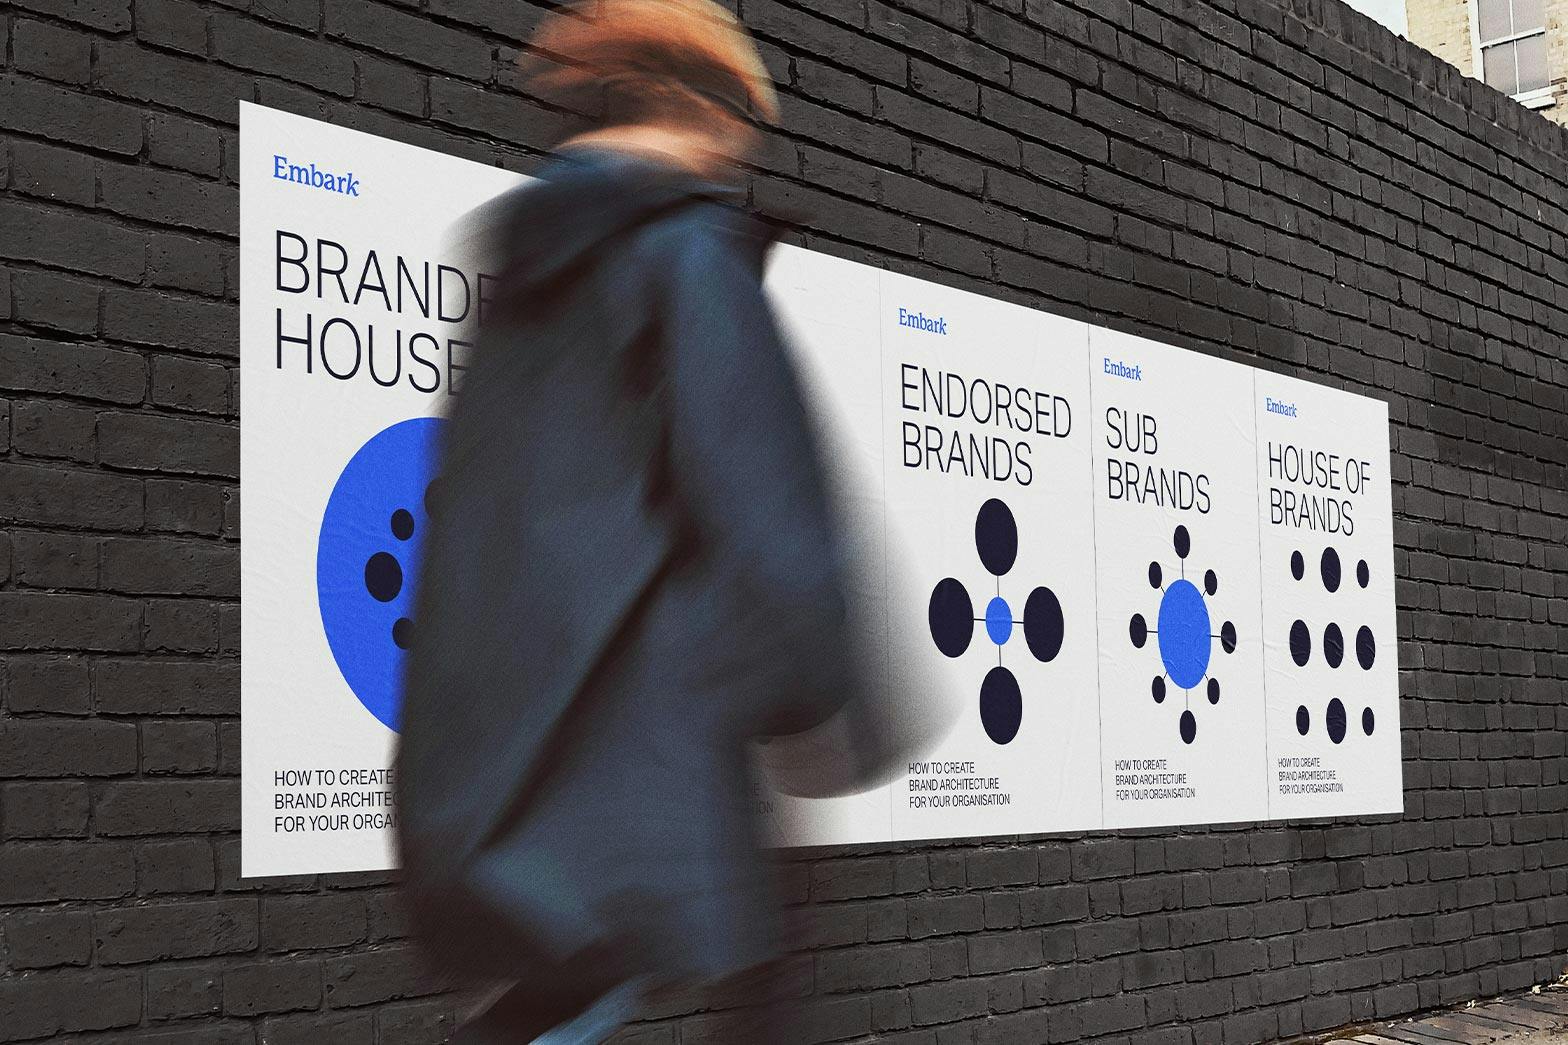 Man walking past posters about brand architecture on a brick wall